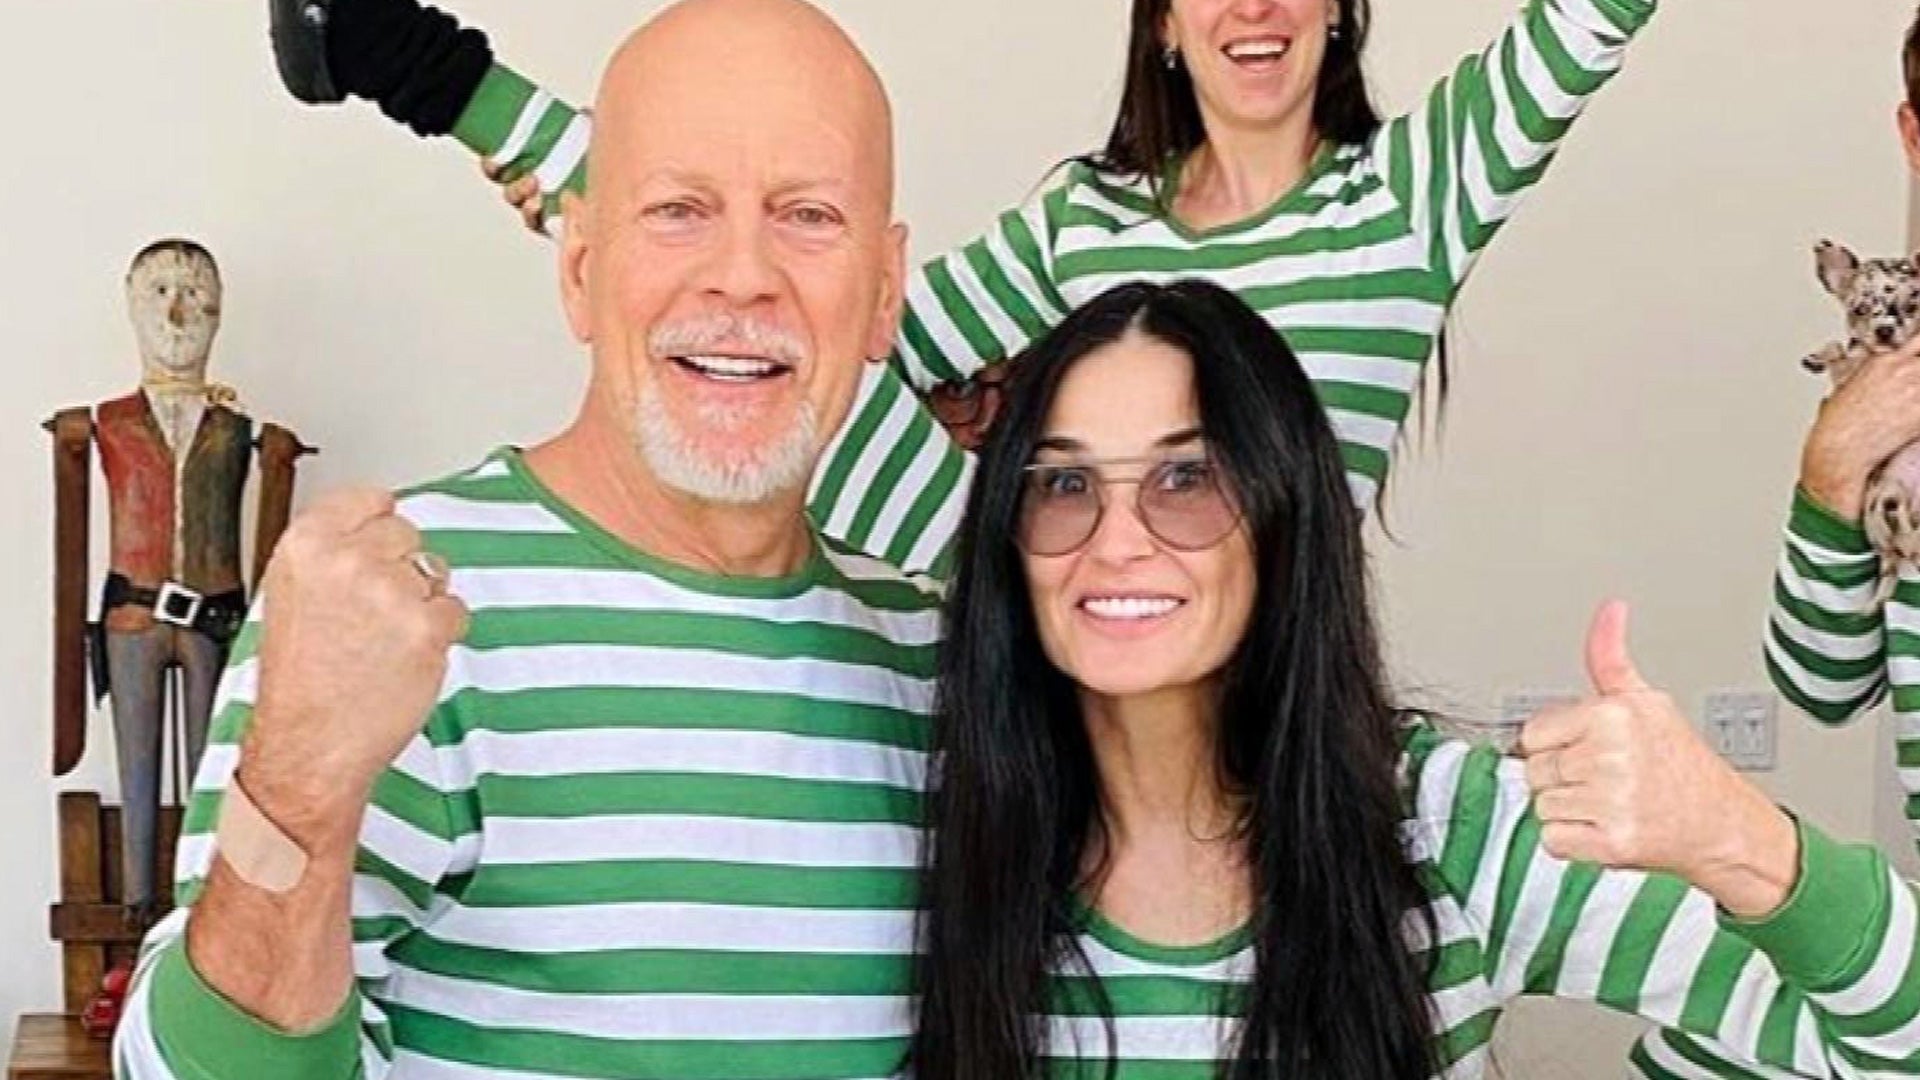 Bruce Willis Reunites With Wife Emma Heming After Being Quarantined With Ex Demi Moore Entertainment Tonight pic